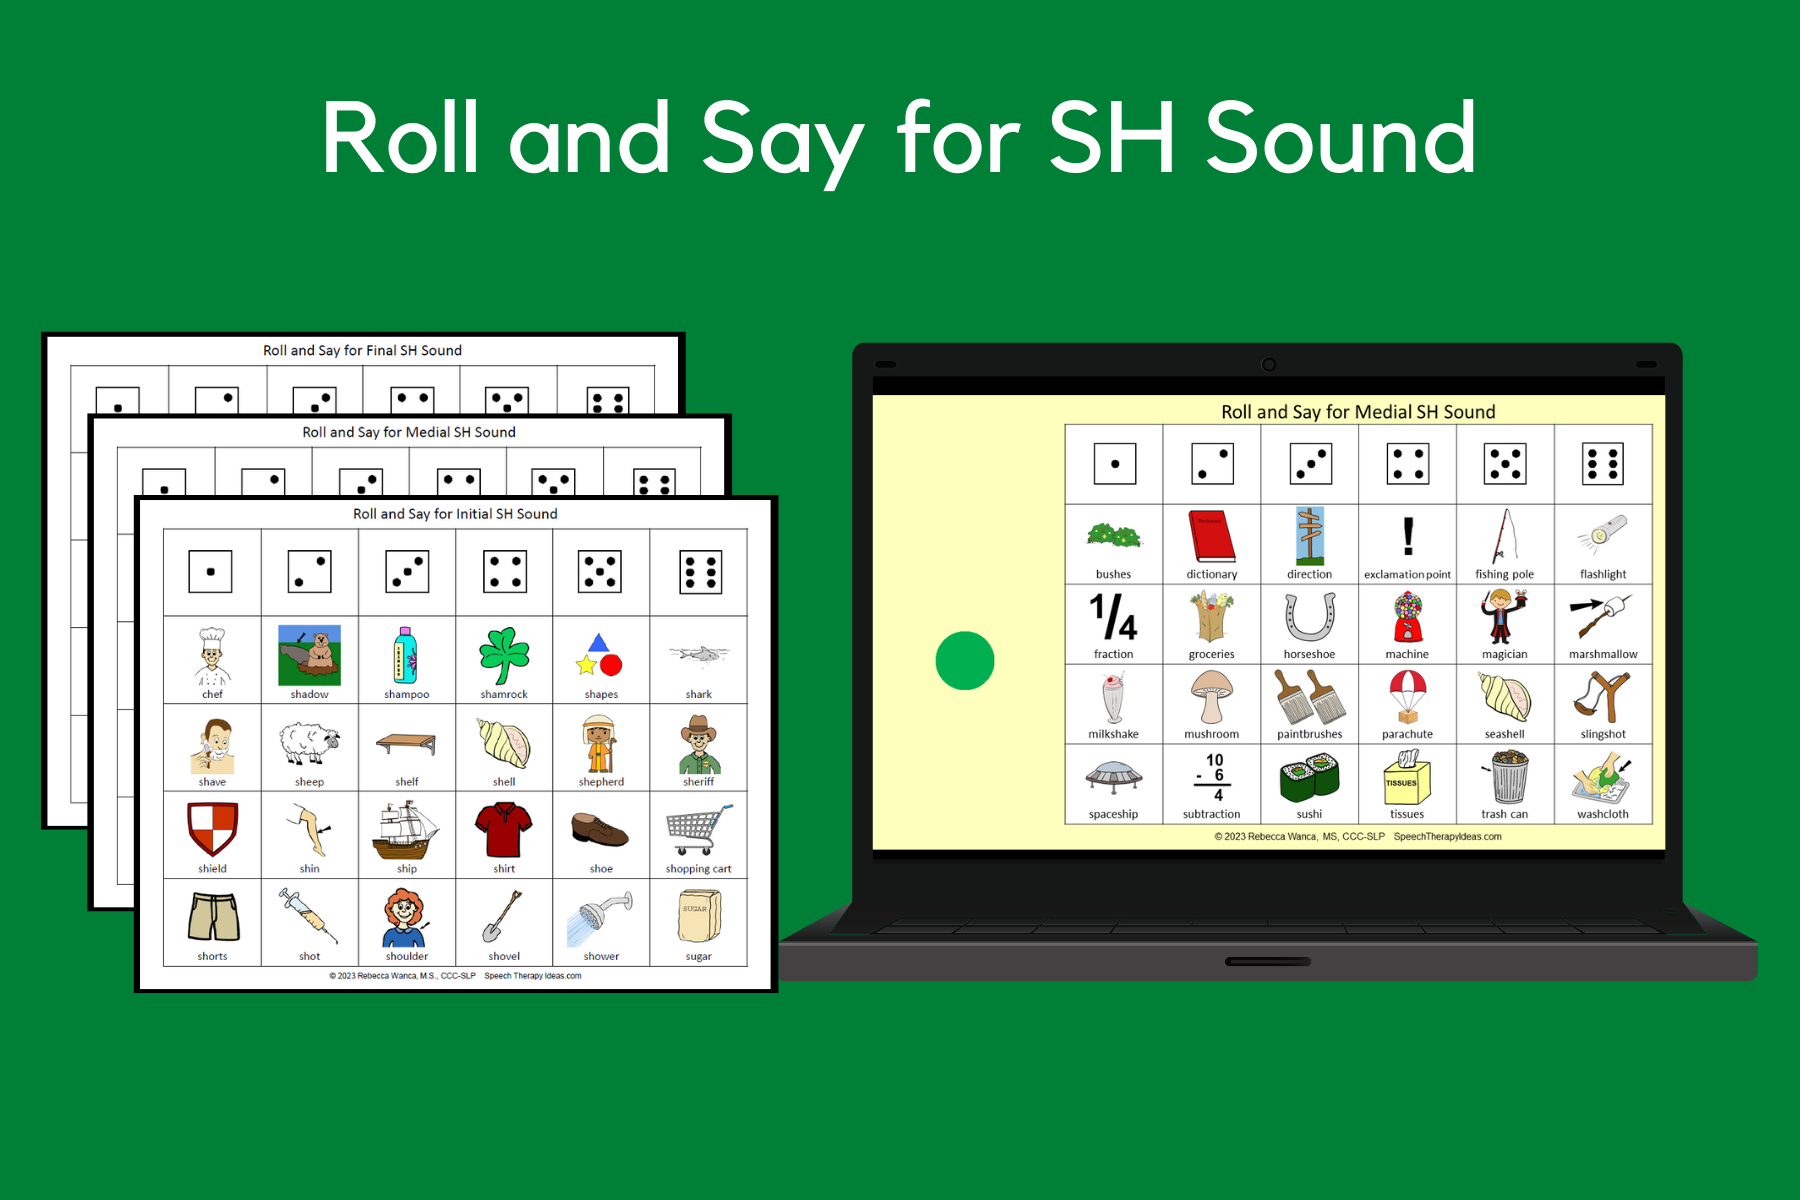 Roll and Say for SH Sound